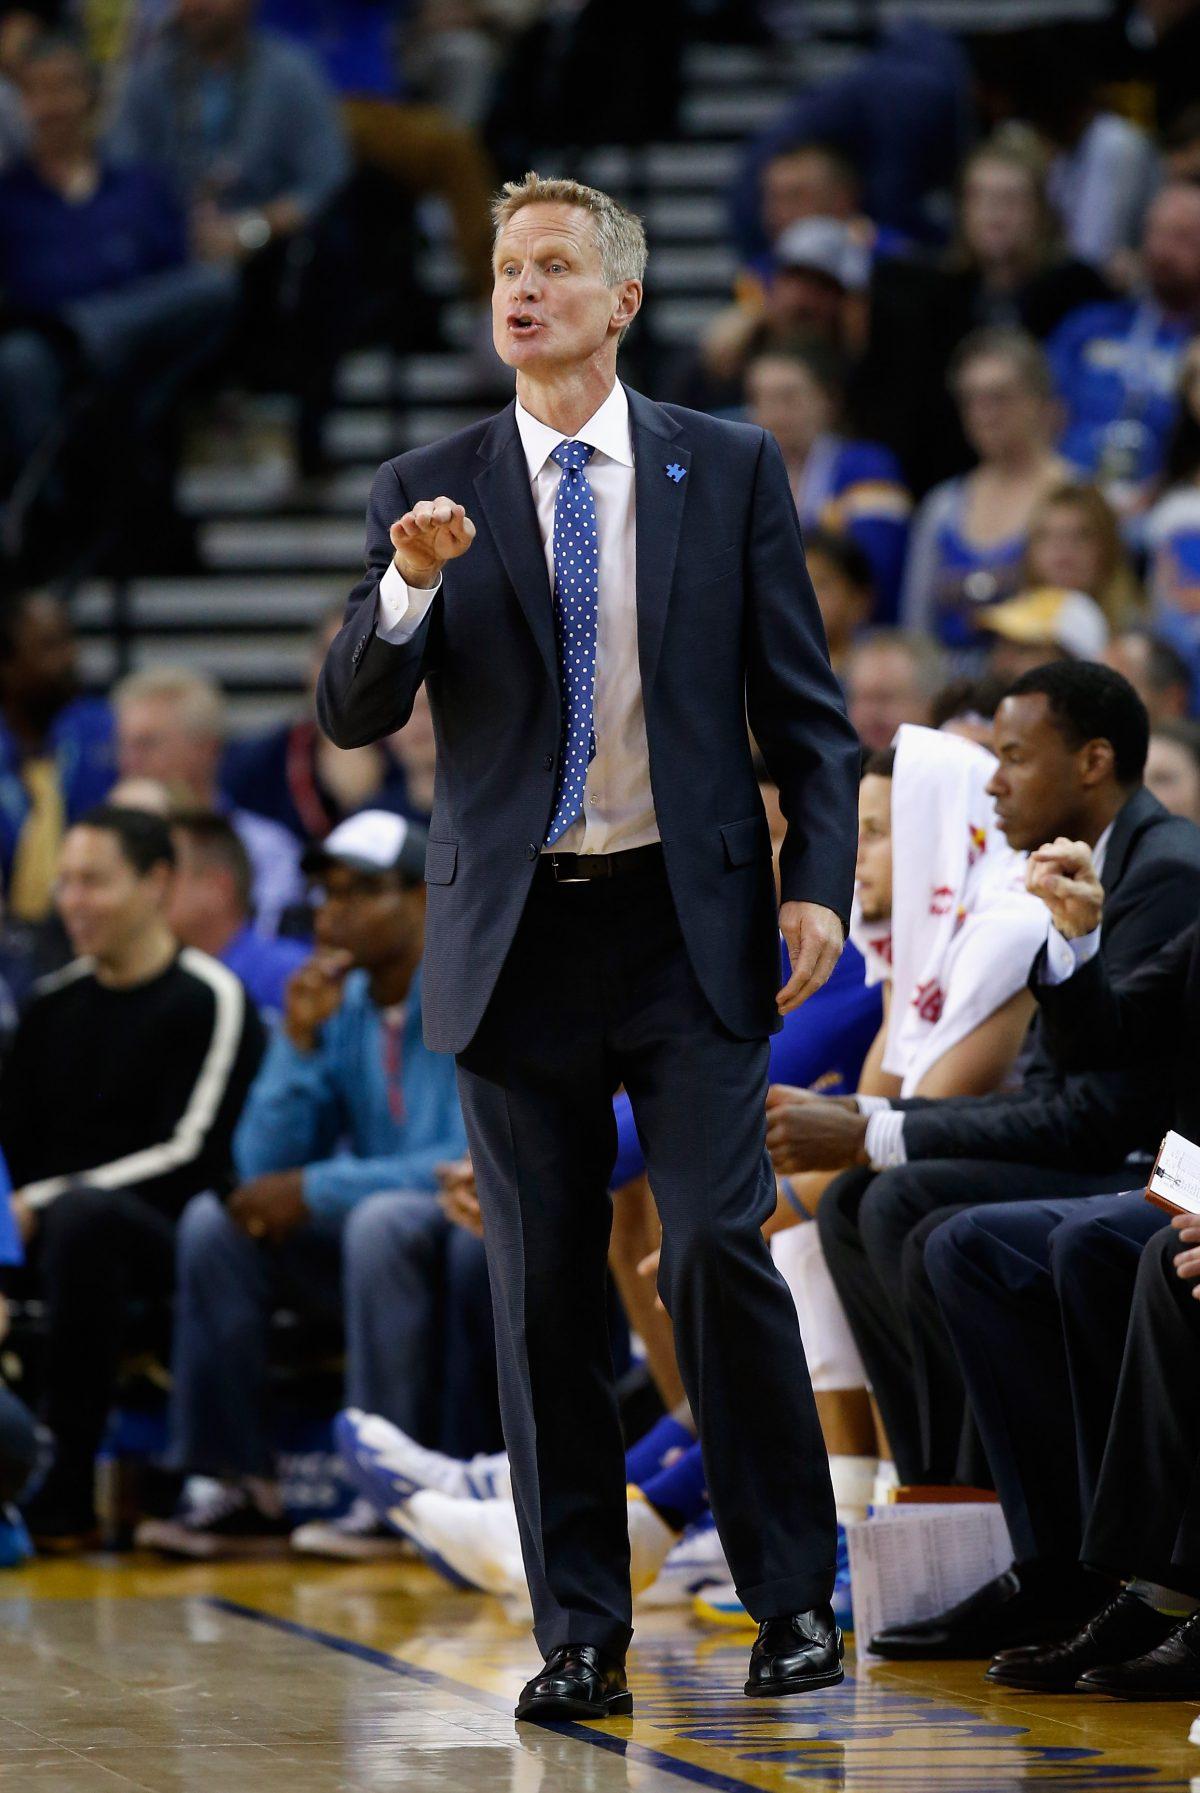 Steve Kerr, coach of the Golden State Warriors, in a file photograph. (Ezra Shaw/Getty Images)